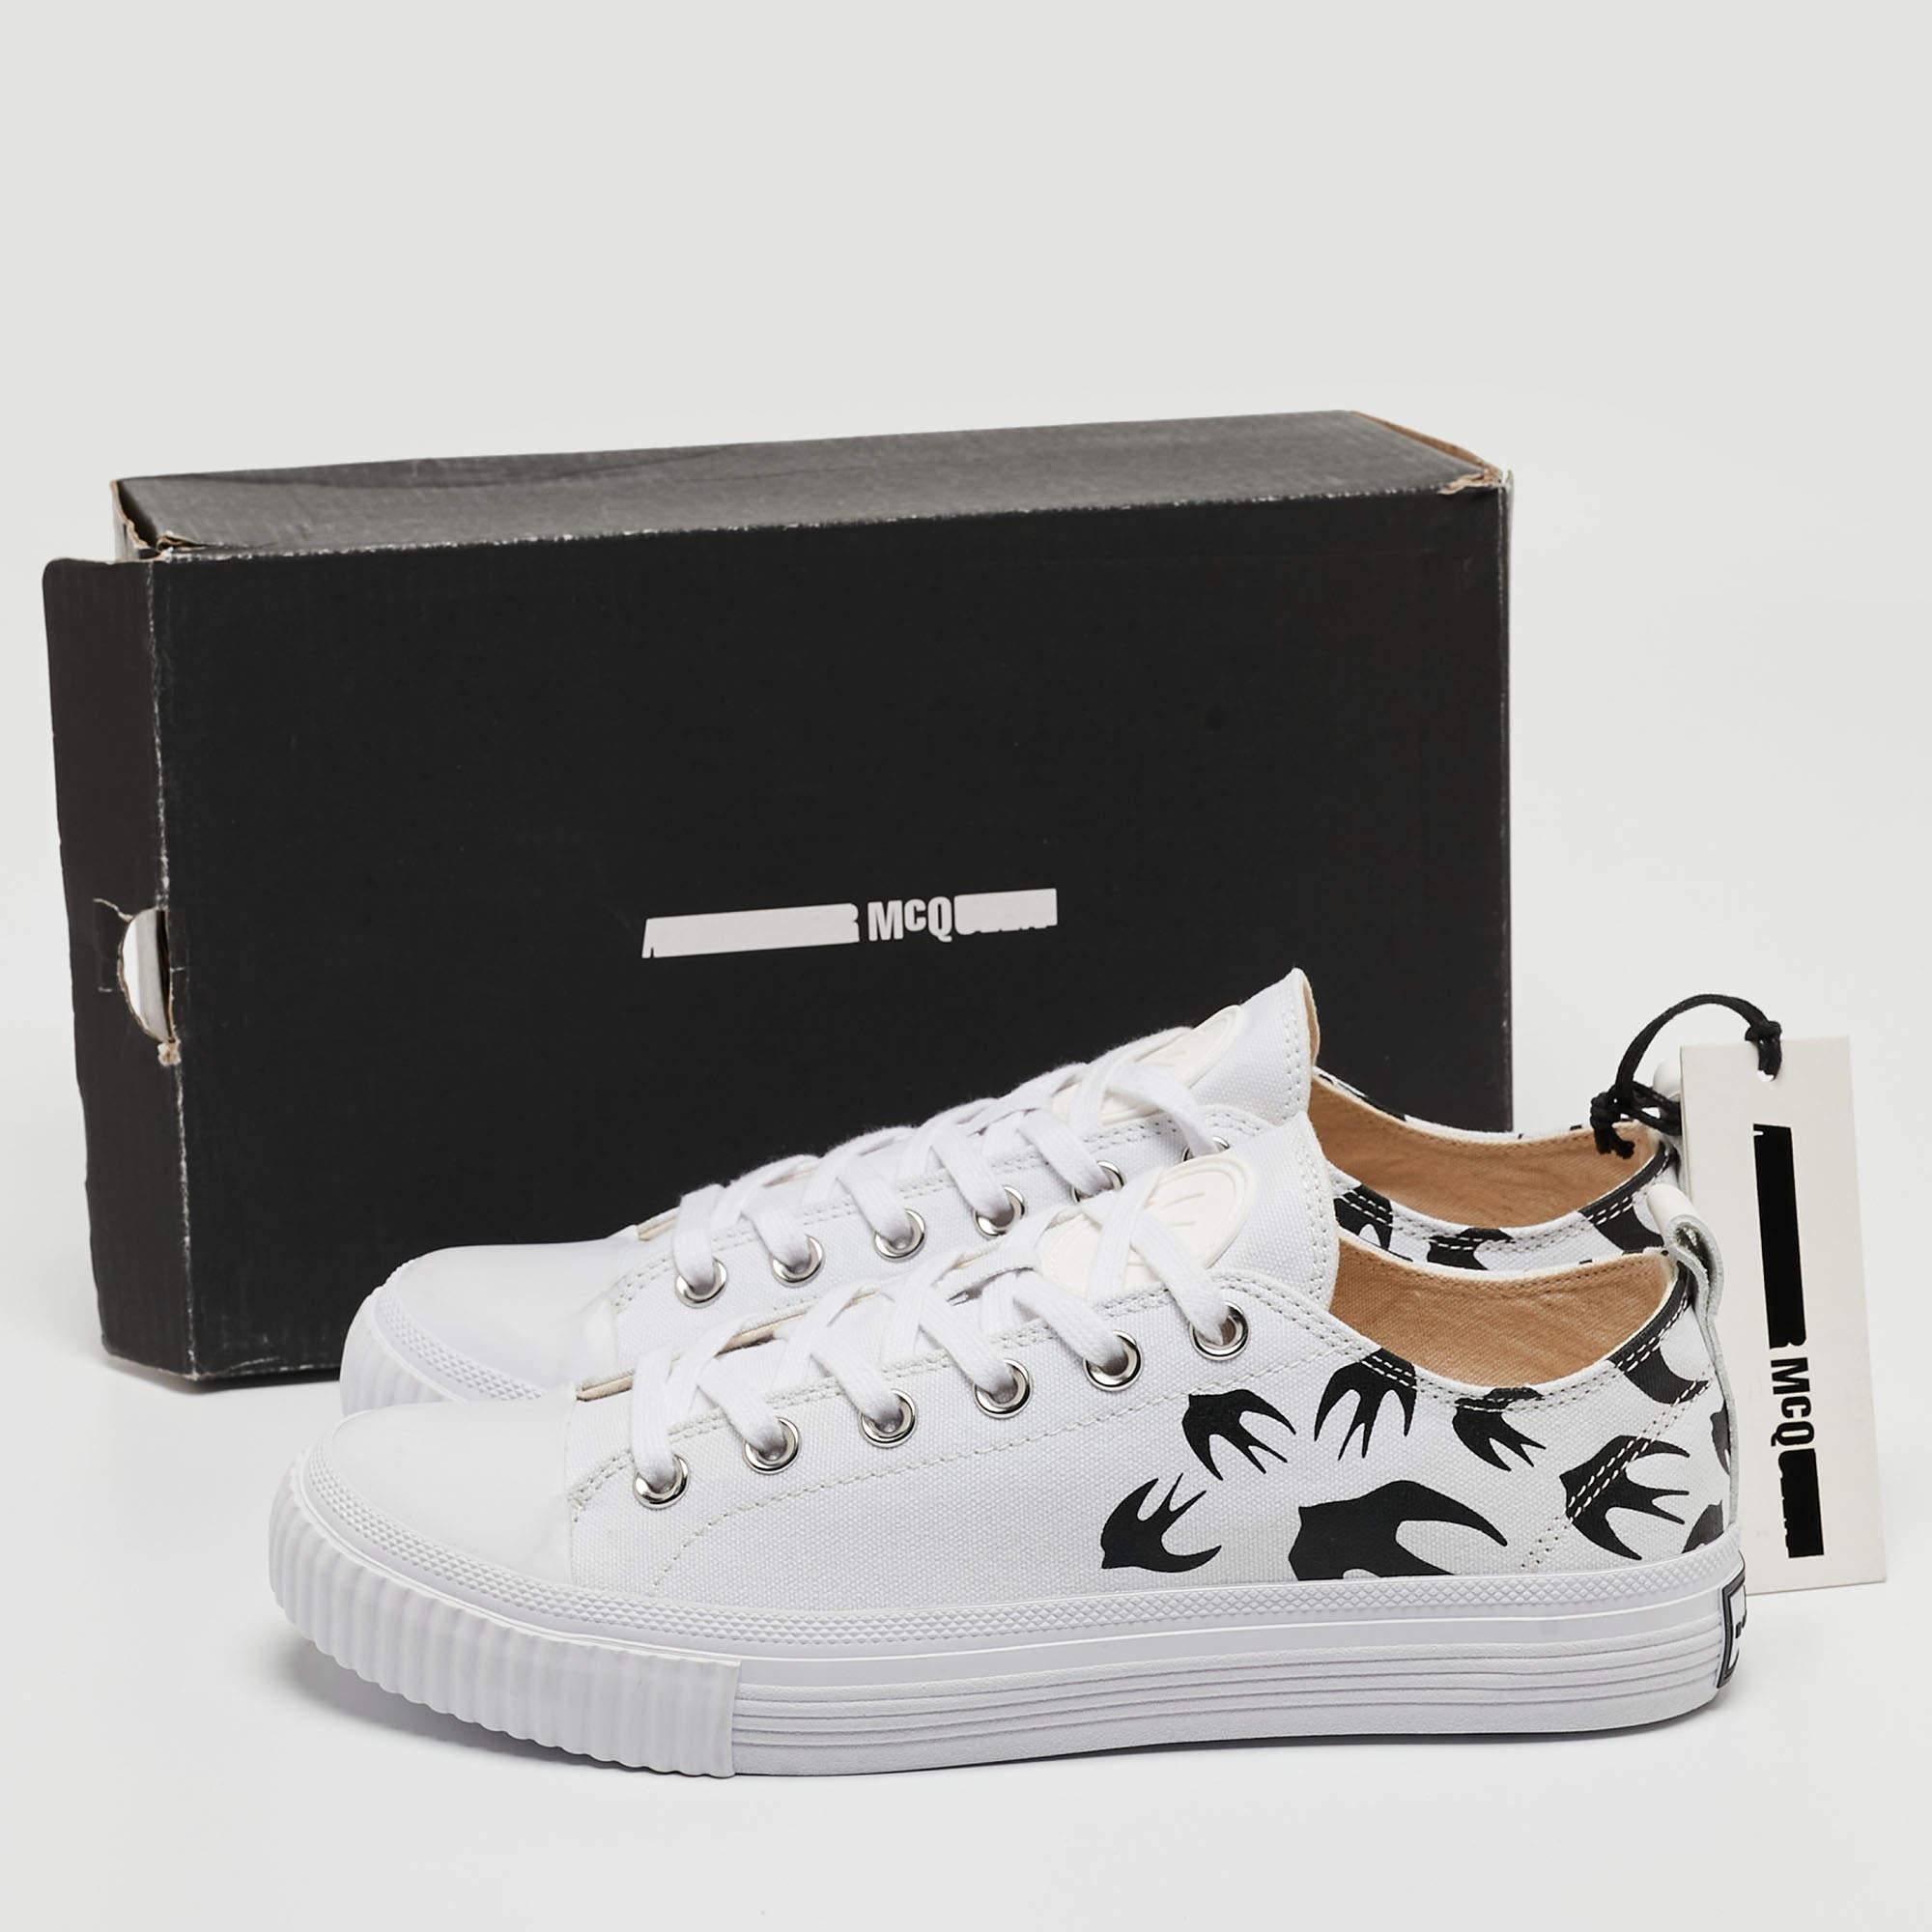 McQ by Alexander McQueen White/Black Canvas Shallow Swarm Sneakers Size 40 5